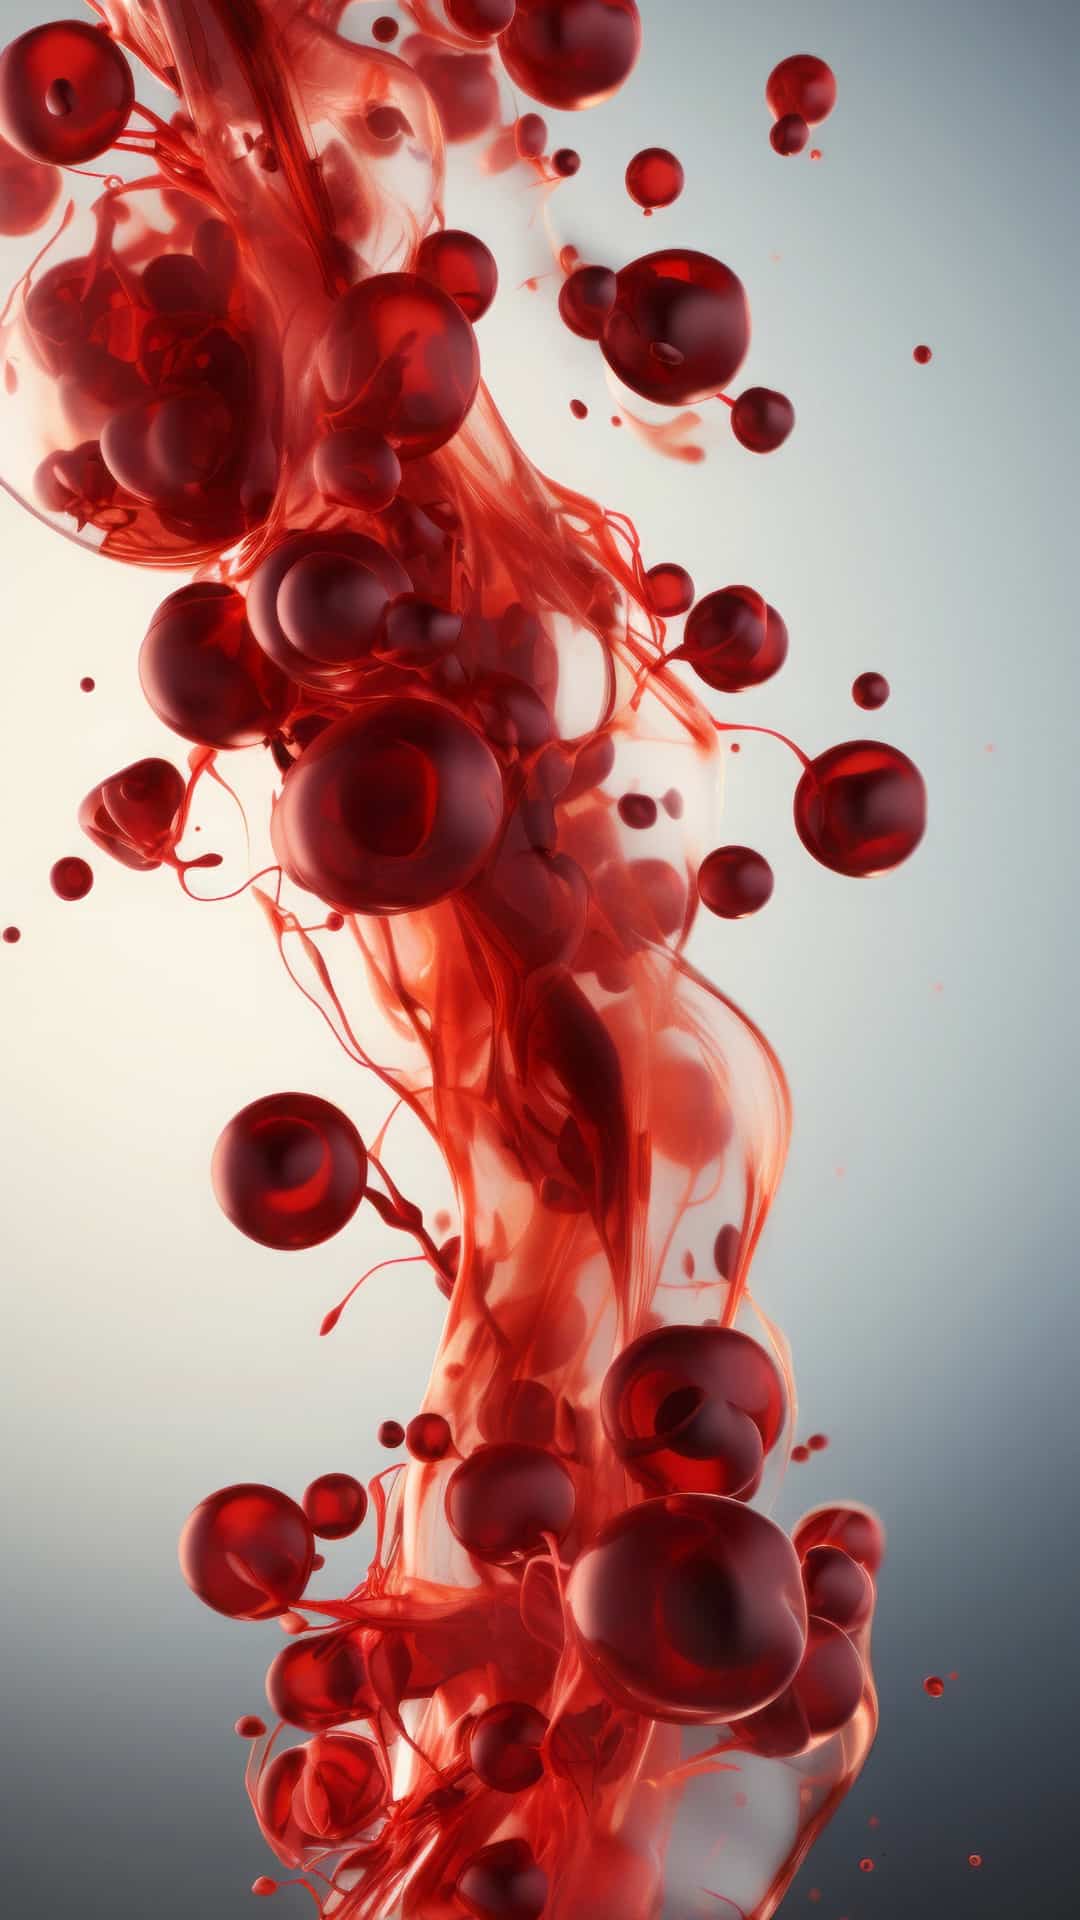 Blood cells to represent the complexities of one of the heritable connective tissue disorders Vascular Ehlers-Danlos Syndrome also known as Vascular EDS or vEDS.